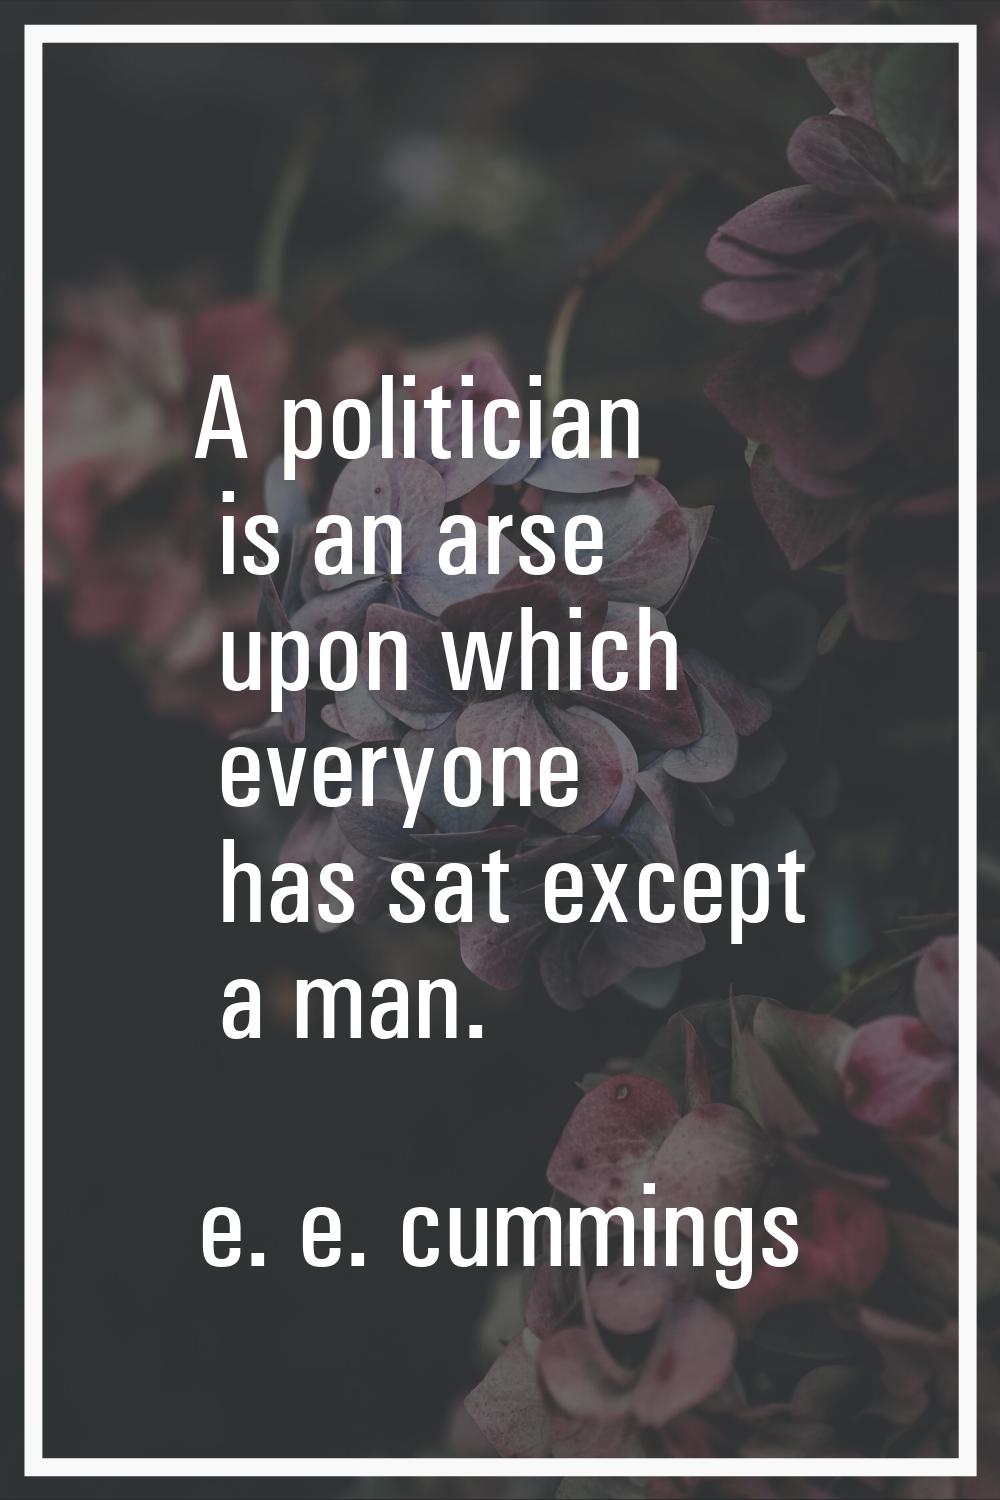 A politician is an arse upon which everyone has sat except a man.